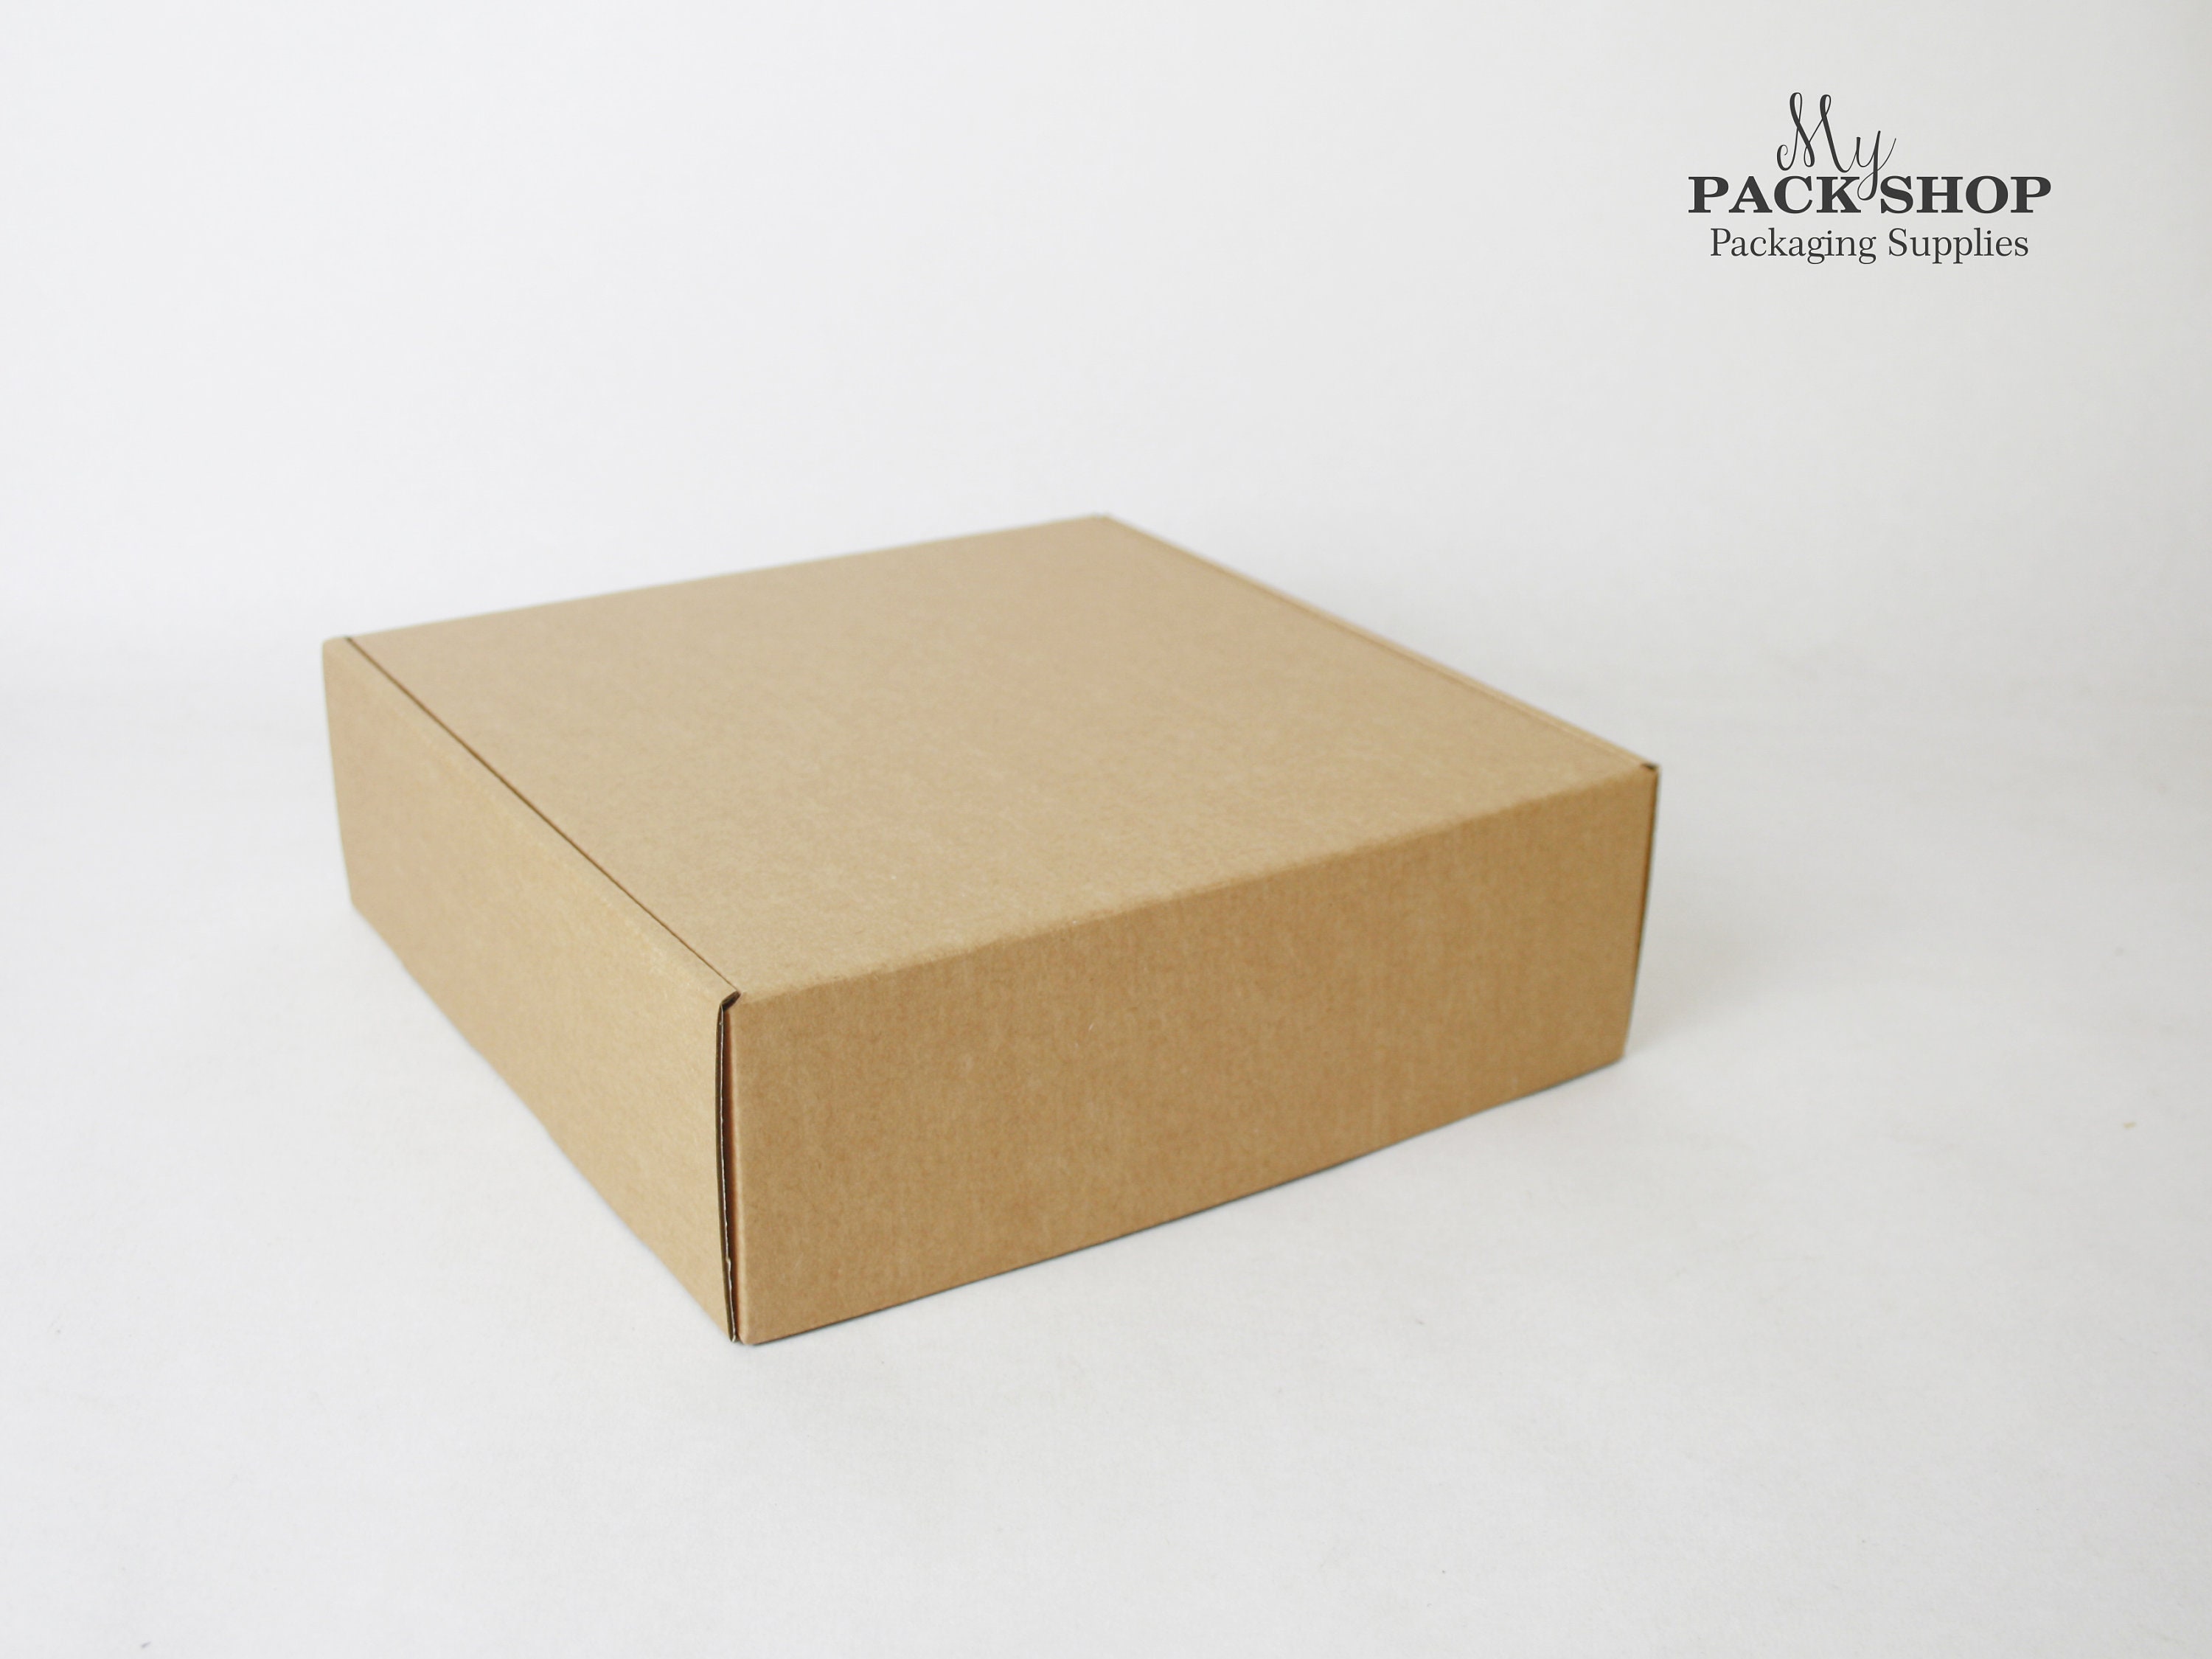 20x Tiny Shipping Boxes, Small Parcel Flat Shipping Boxes, Mailers for  Small Business, Packaging Boxes Wholesale 